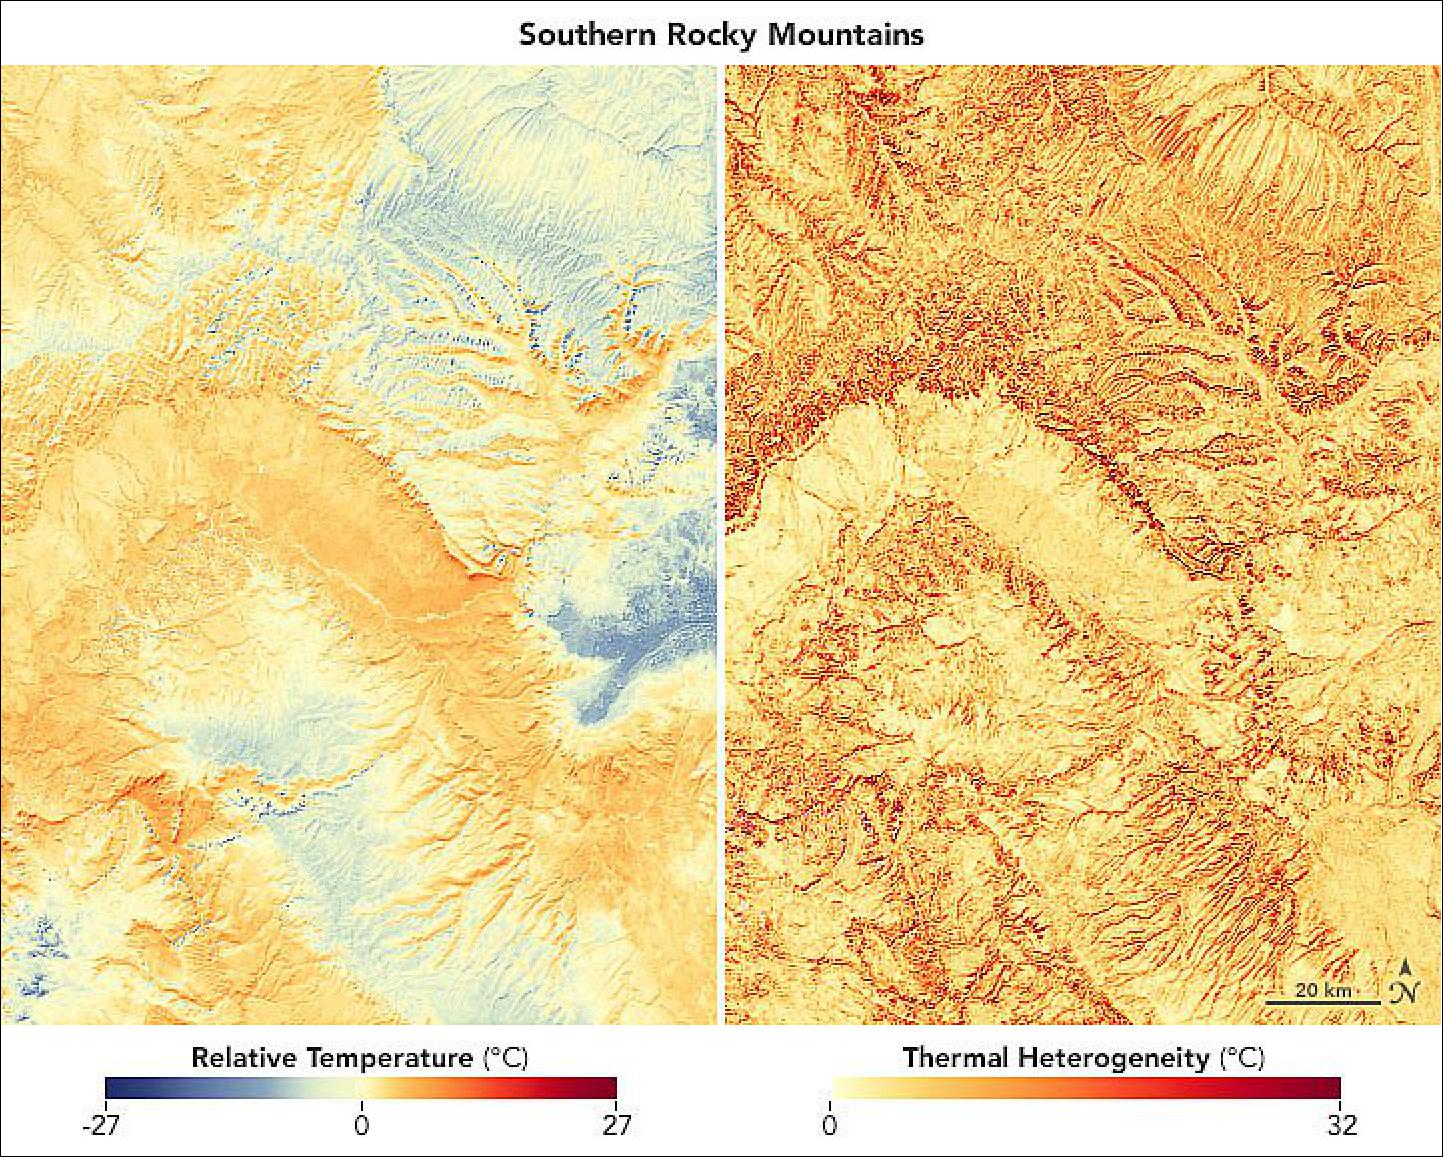 Figure 81: This detailed map pair shows relative temperature (left) and thermal heterogeneity (right) in the southern Rocky Mountains in the period 2013-2018. Note the large temperature variations. This is common in mountain environments, where temperatures can change over very short distances due to factors such as elevation (image credit: NASA Earth Observatory)